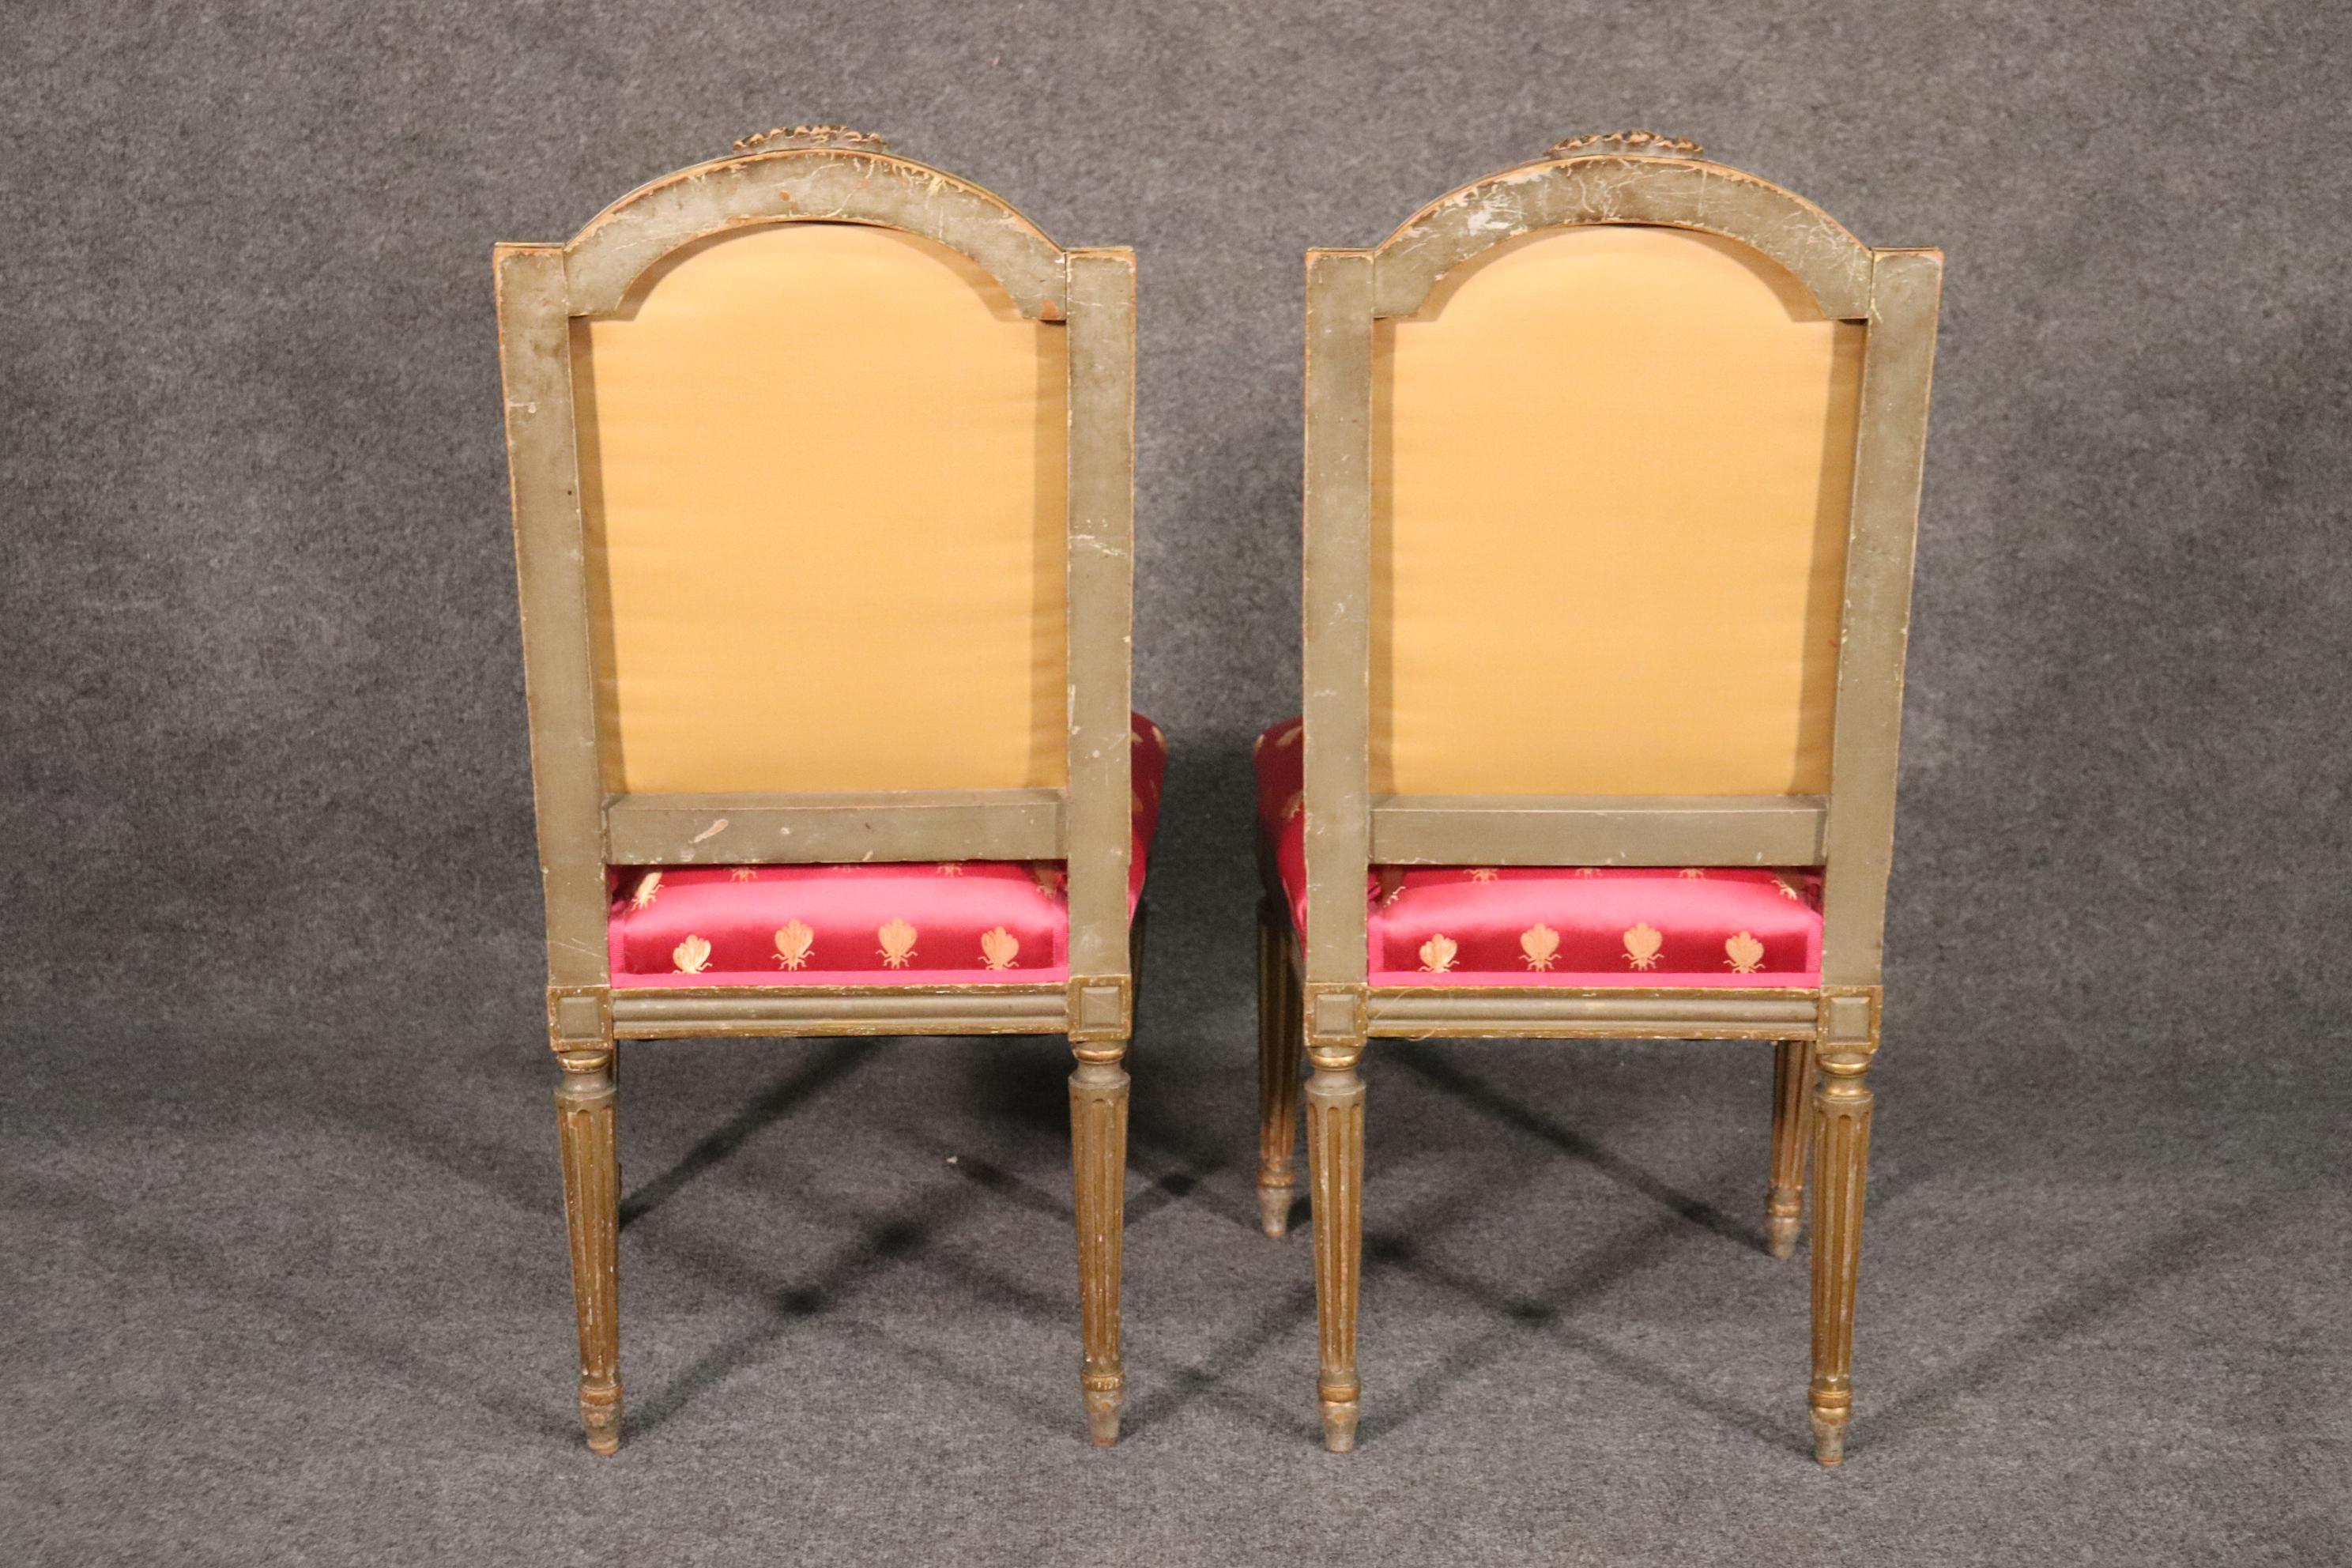 Beech Pair Antique French Louis XVI Painted and Gilded Side Chairs, Circa 1900 For Sale